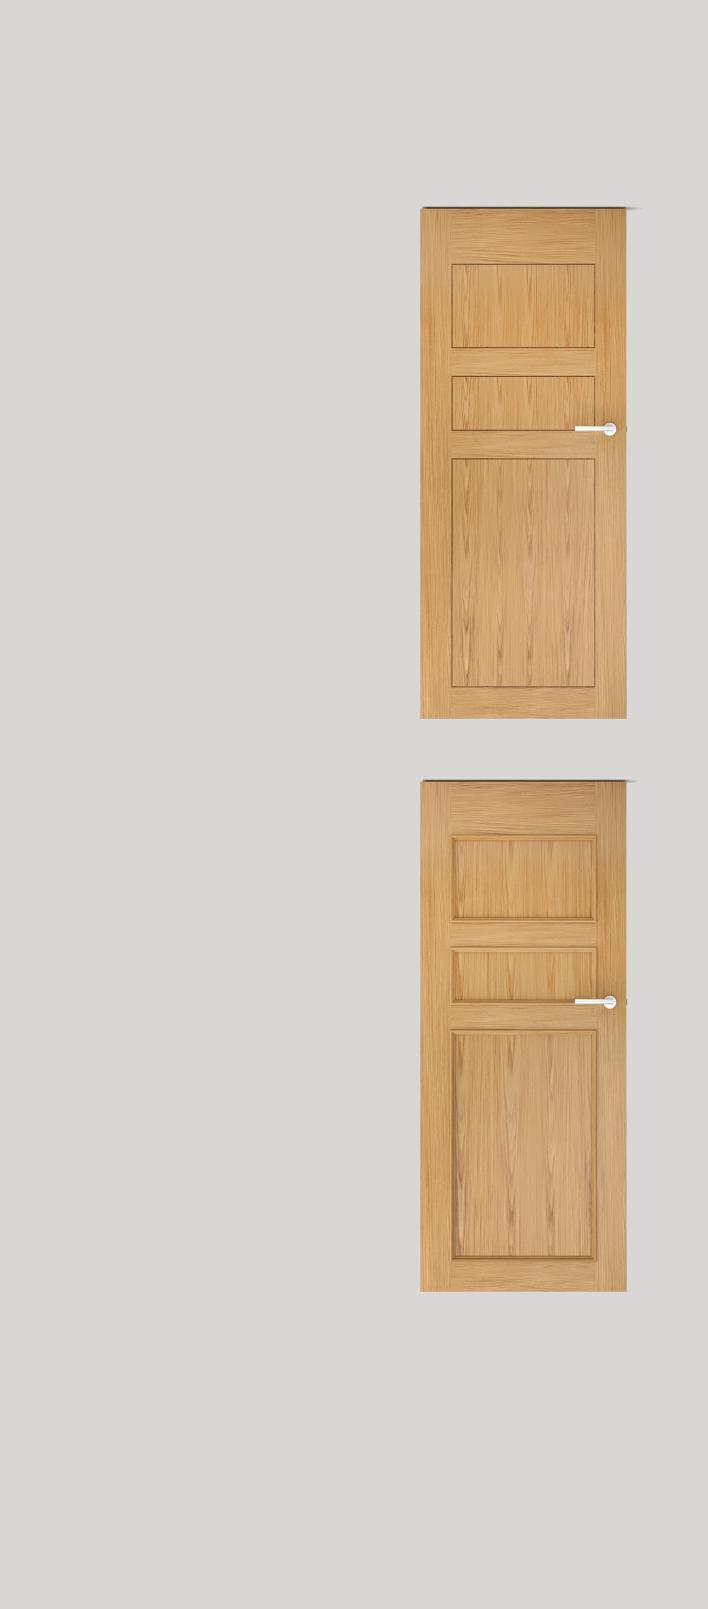 Graefe Robinson A traditional six panel door also available grooved to give a contemporary twist.